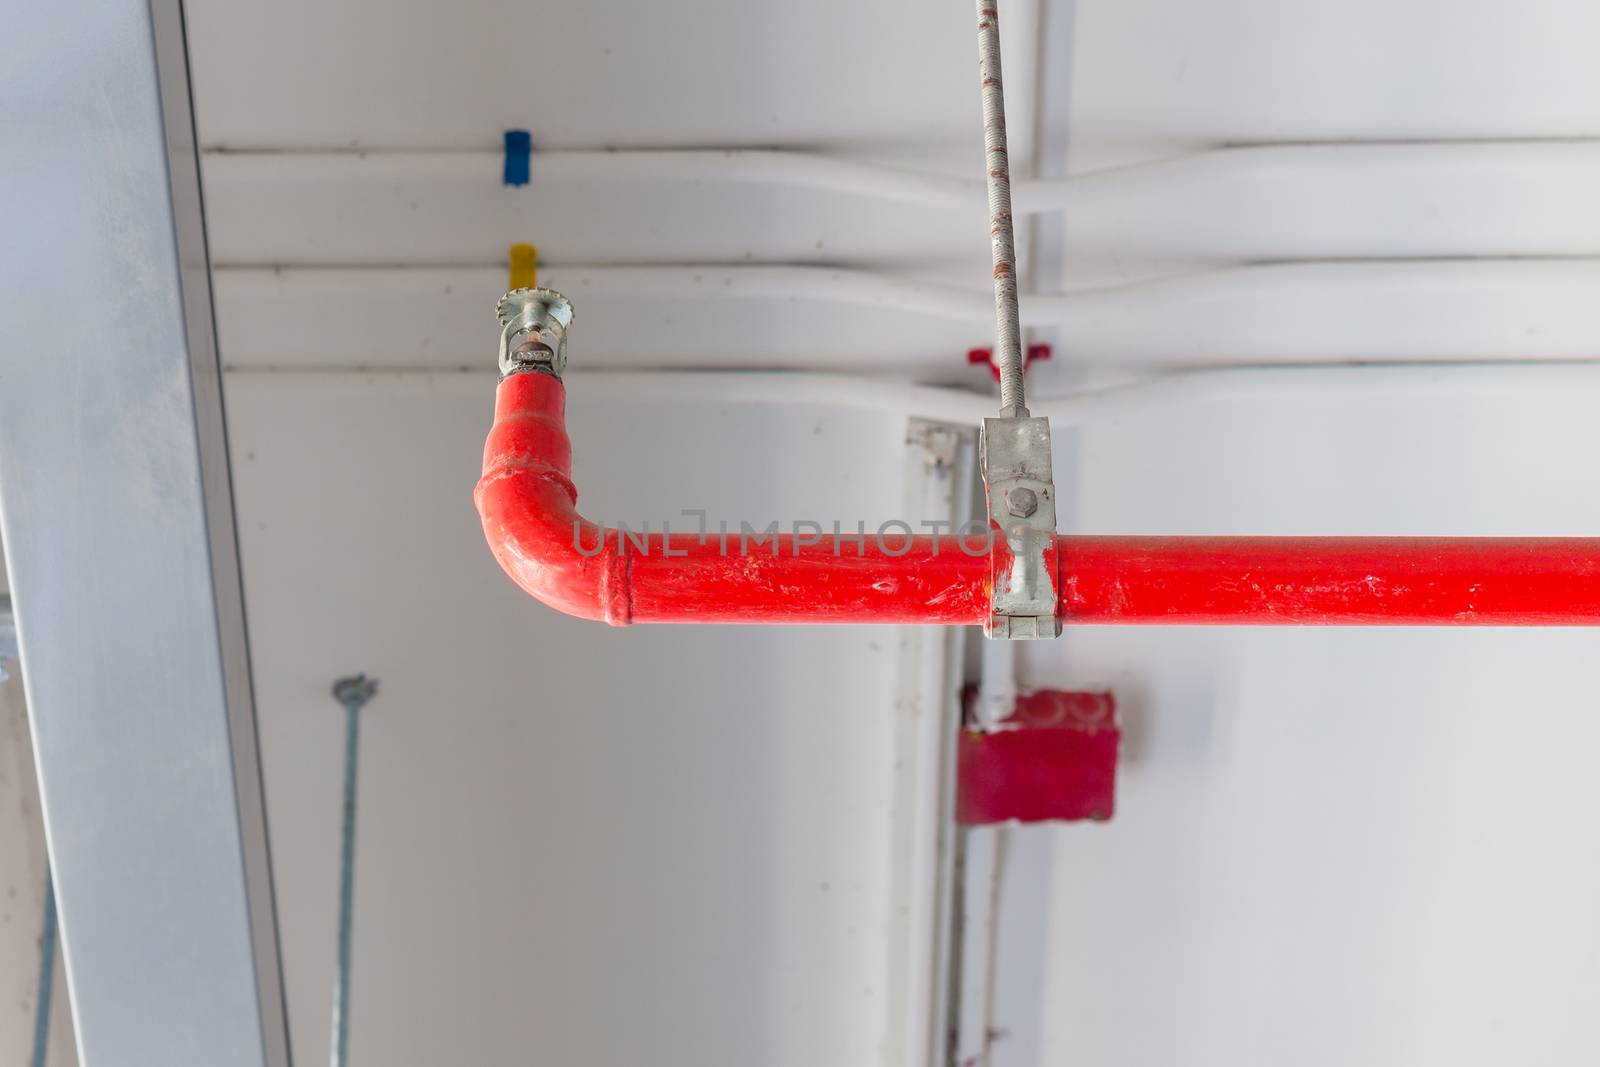 Fire sprinkler and red pipe installed on ceiling for safety conc by FrameAngel